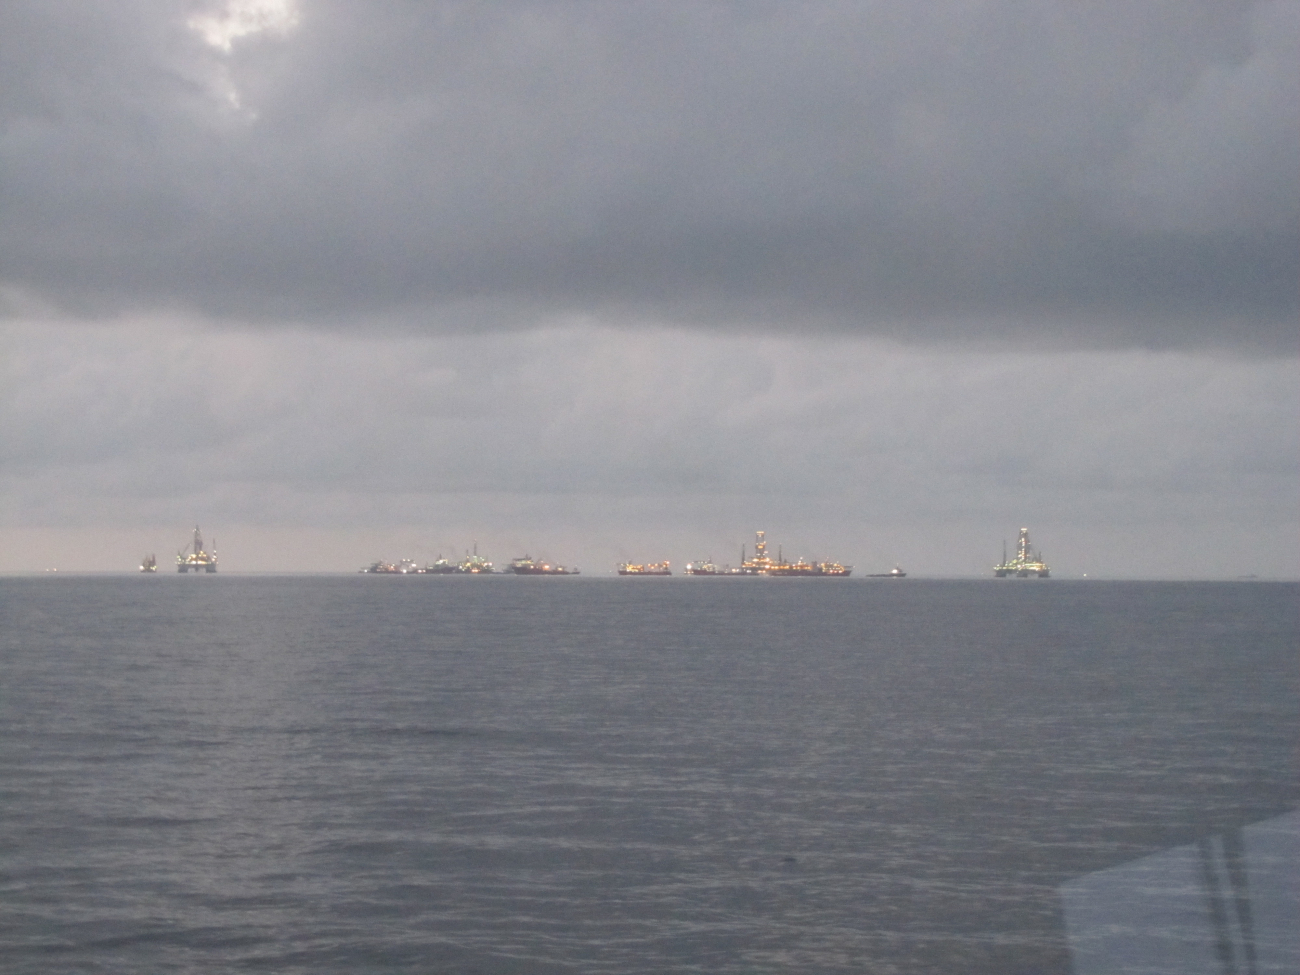 Deepwater Horizon disaster site with vessels on site for relief efforts